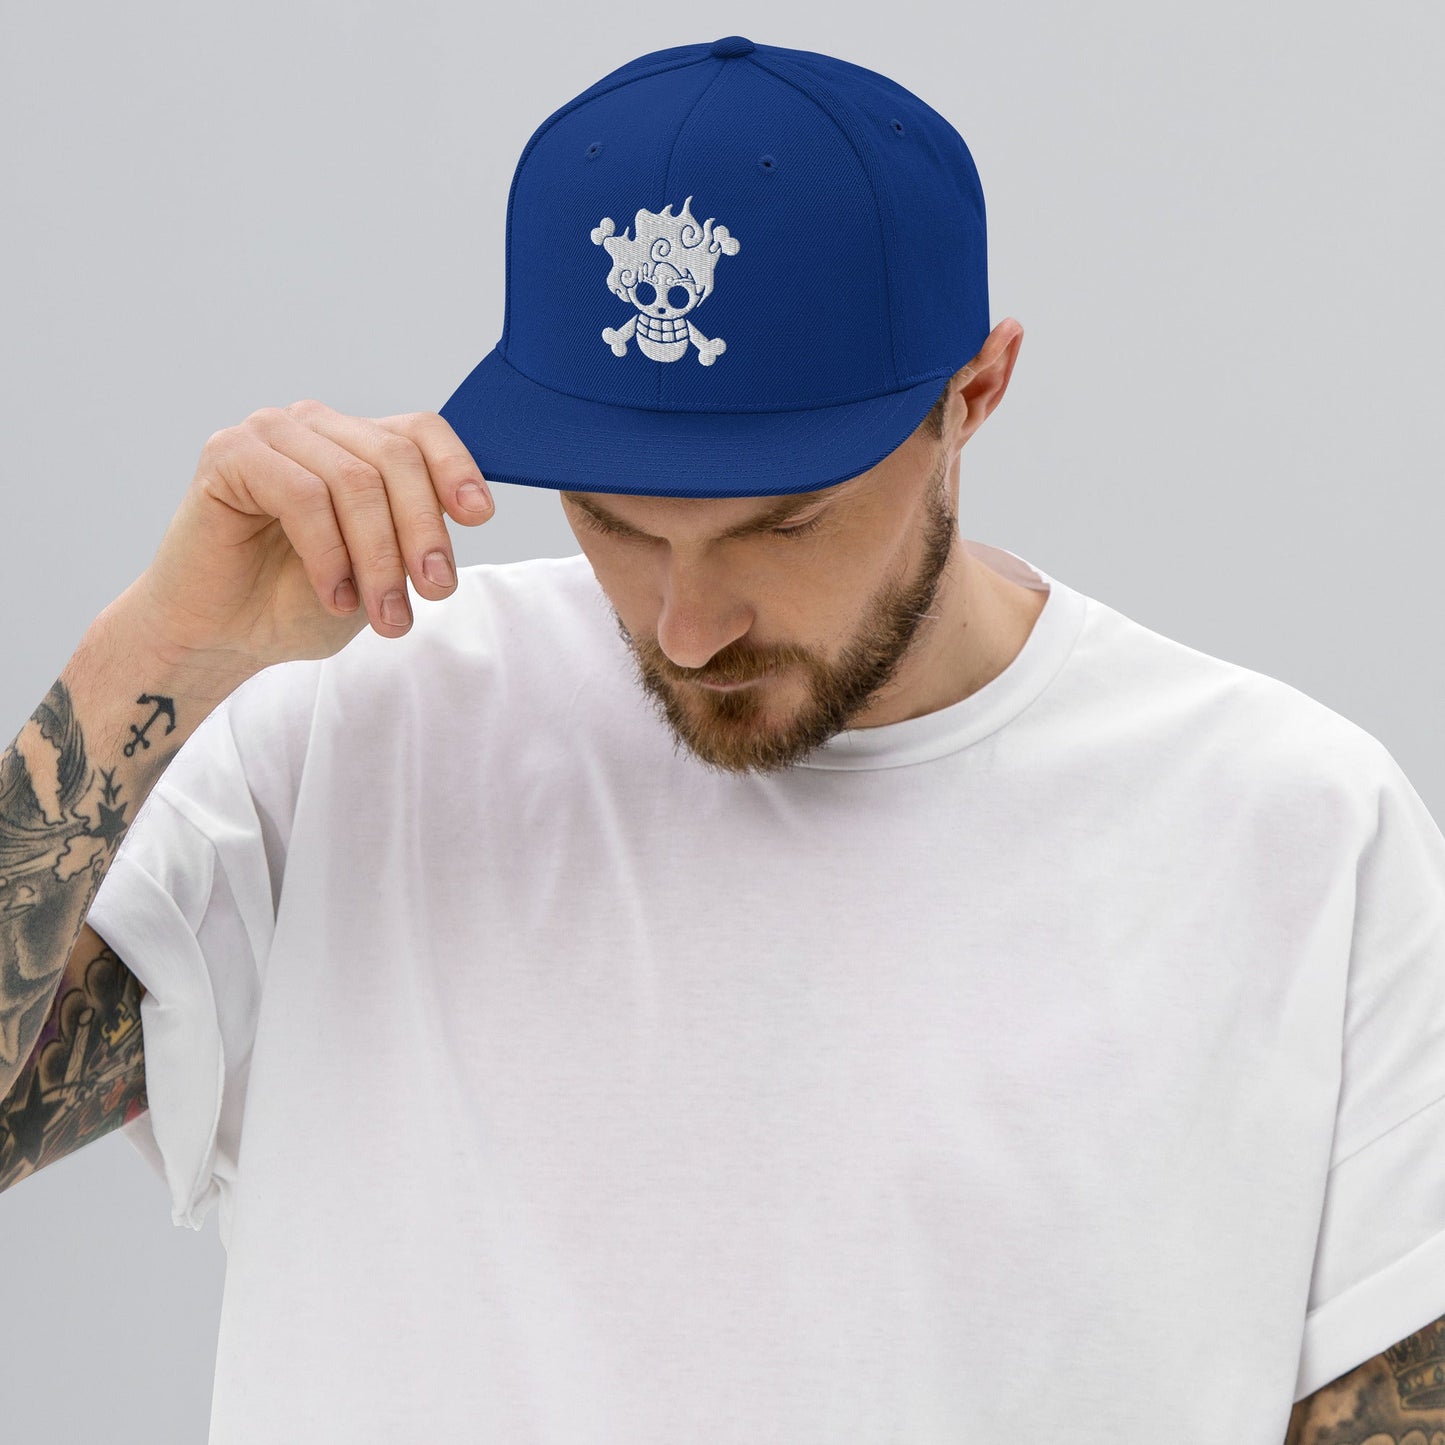 Gear 5 Embroidered Unisex Anime Snap Back Hat